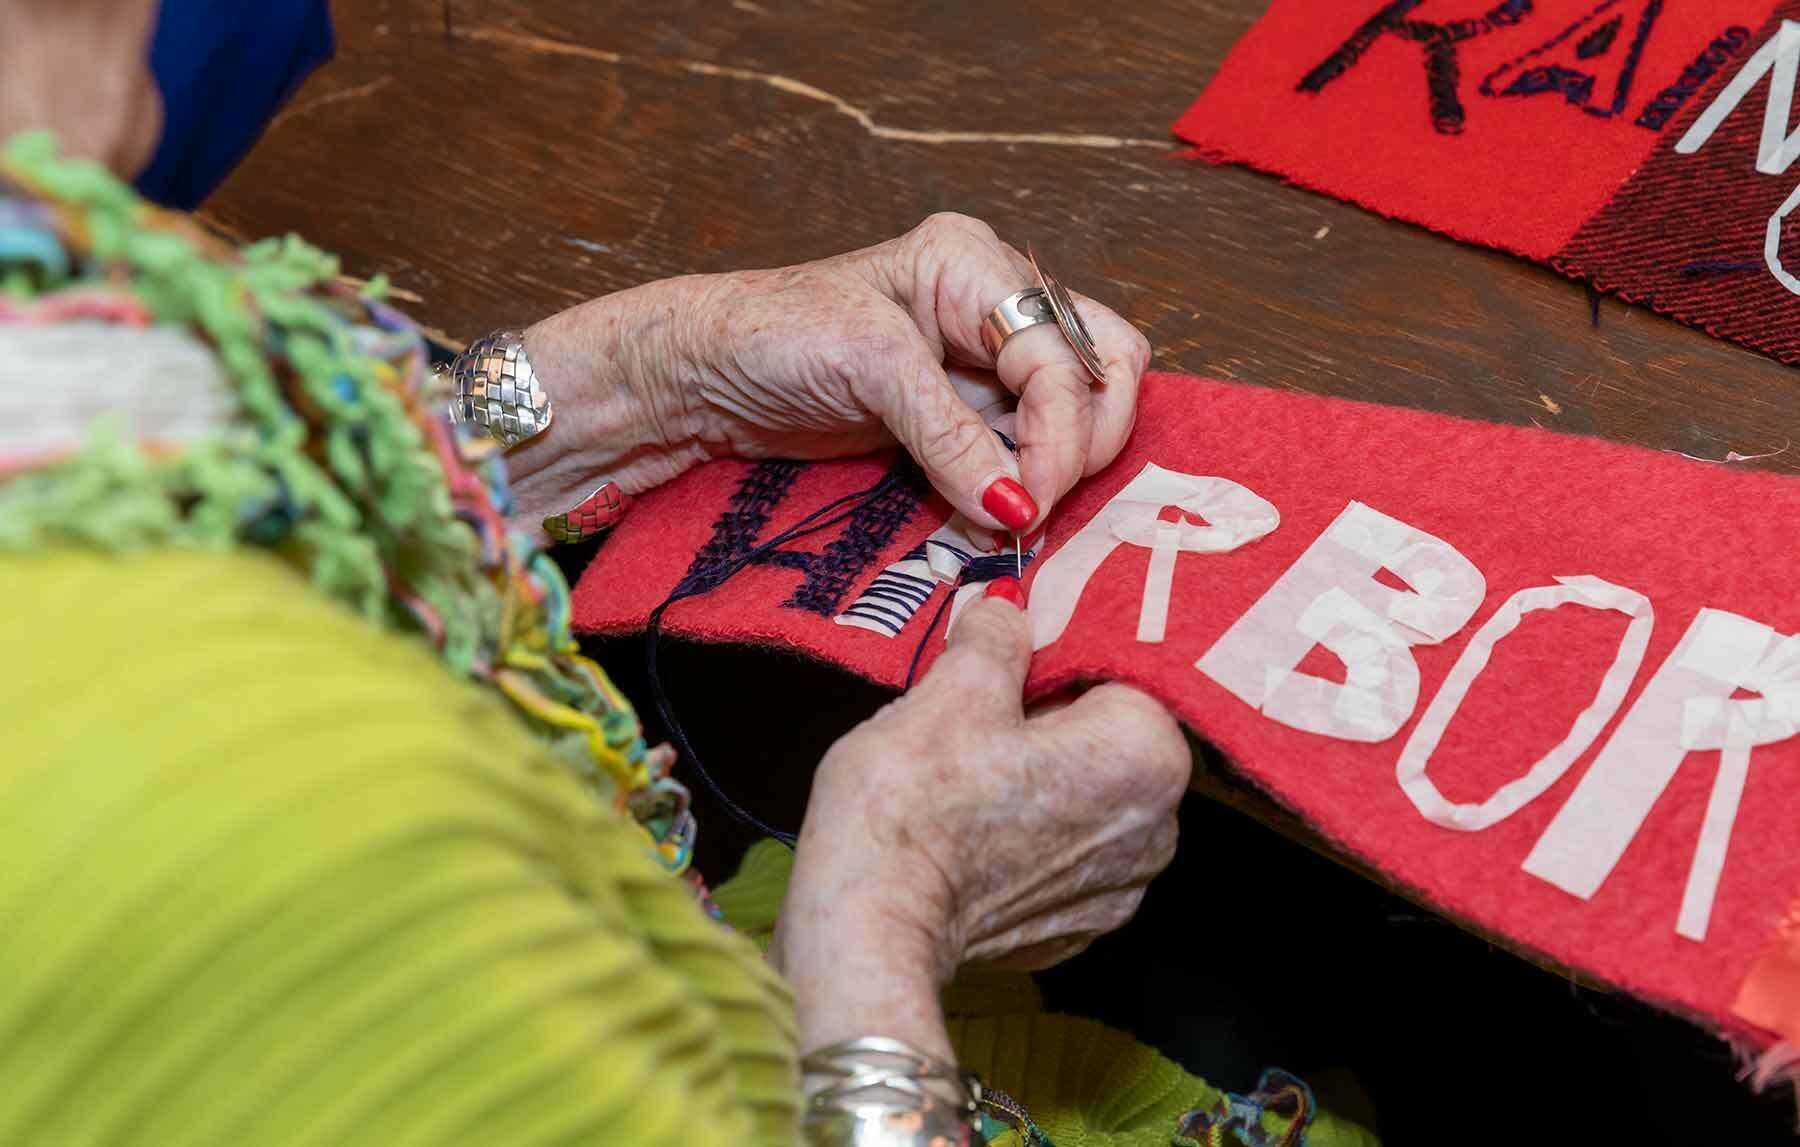 Hands stitching words on a banner.